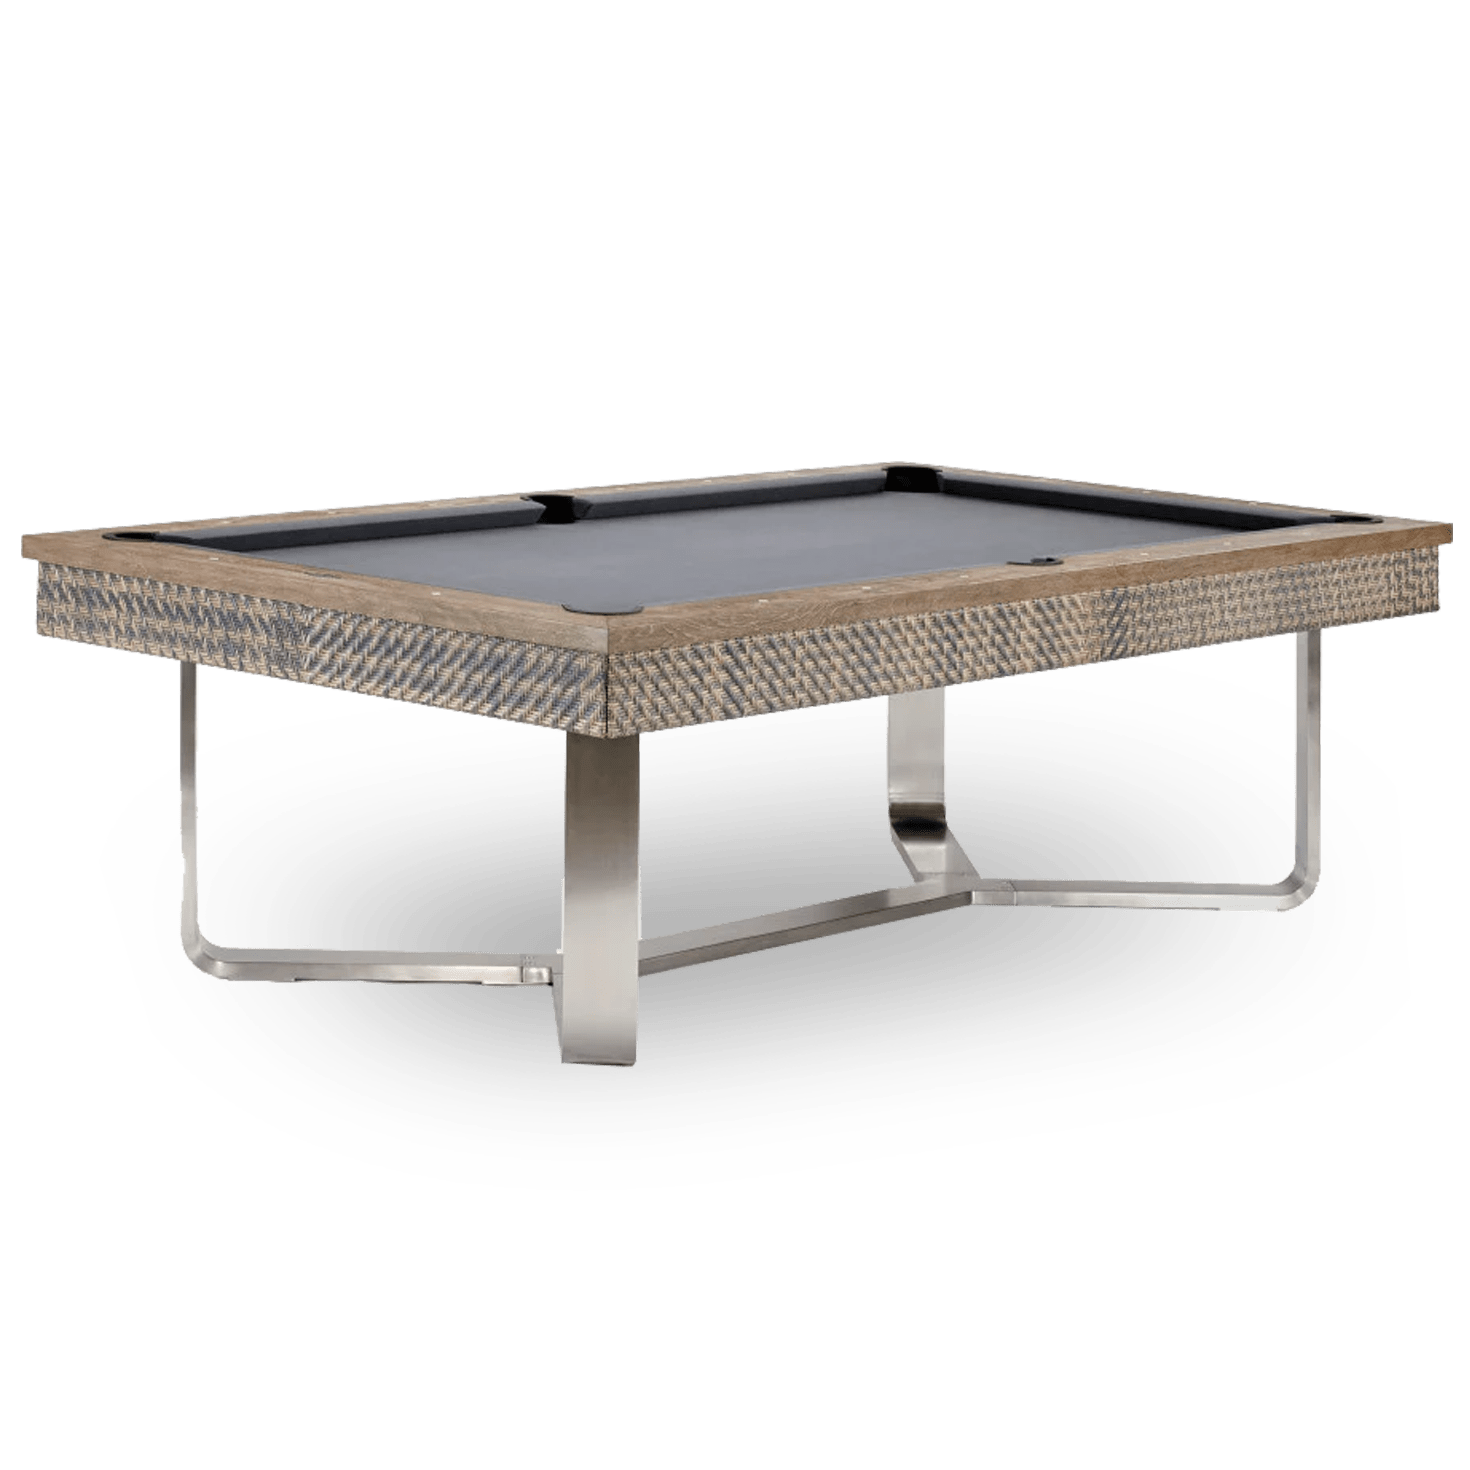 Featured image of Brunswick Pool Table - The Bali model